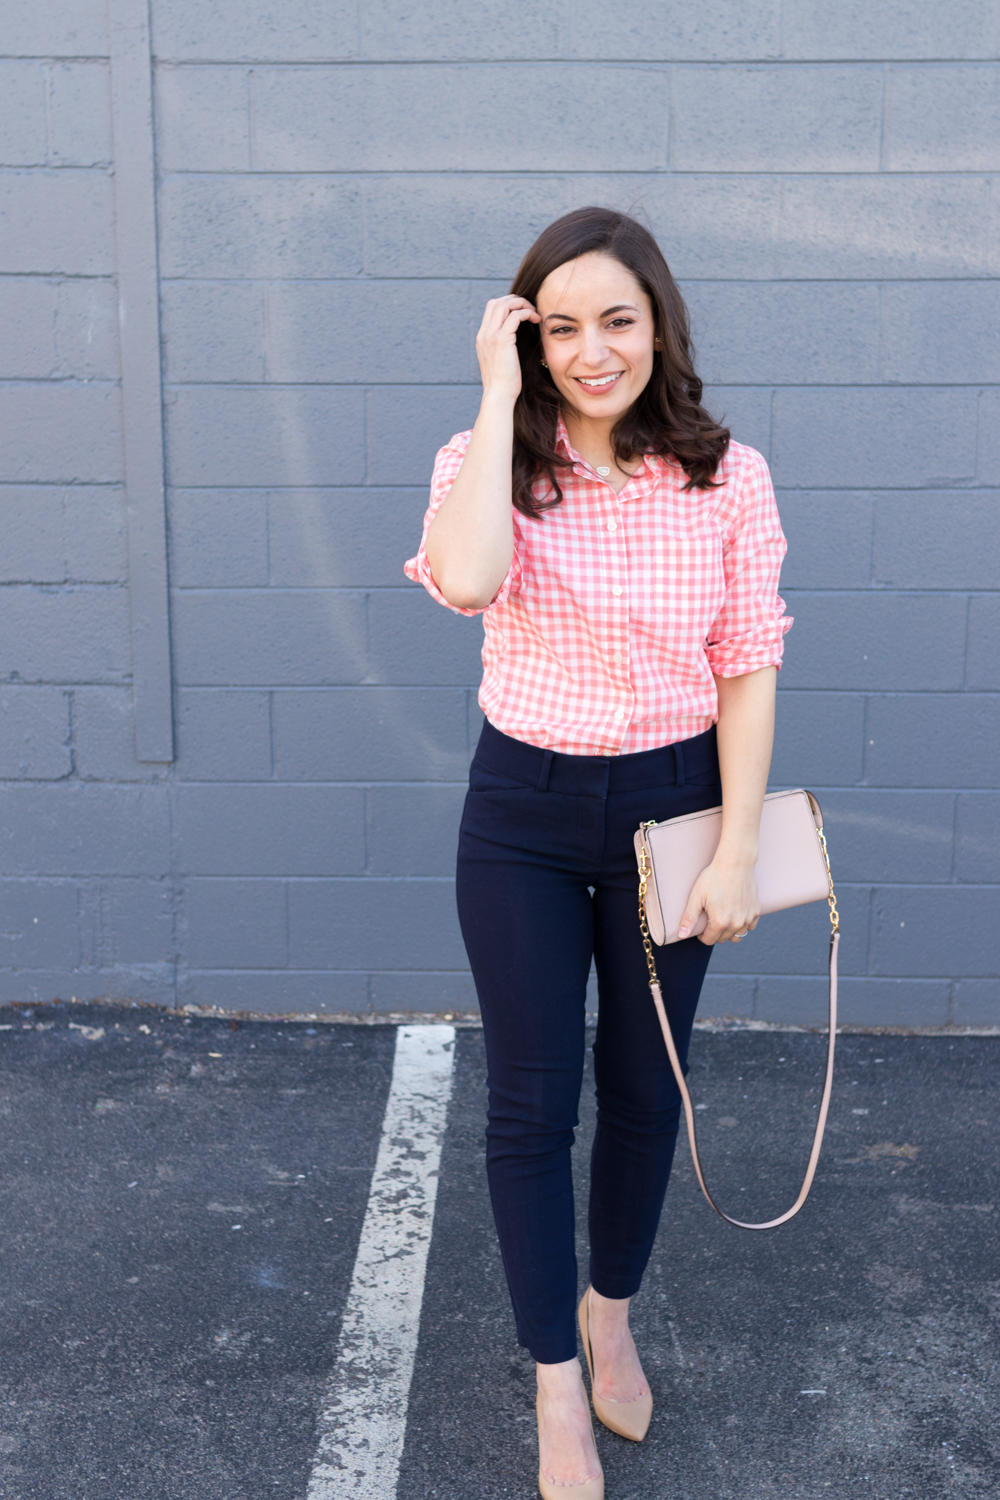 J.Crew Gingham Top | Fashion Trends for Spring 2019 | Petites | Petite Fashion | Pumps and Push-Ups Blog 